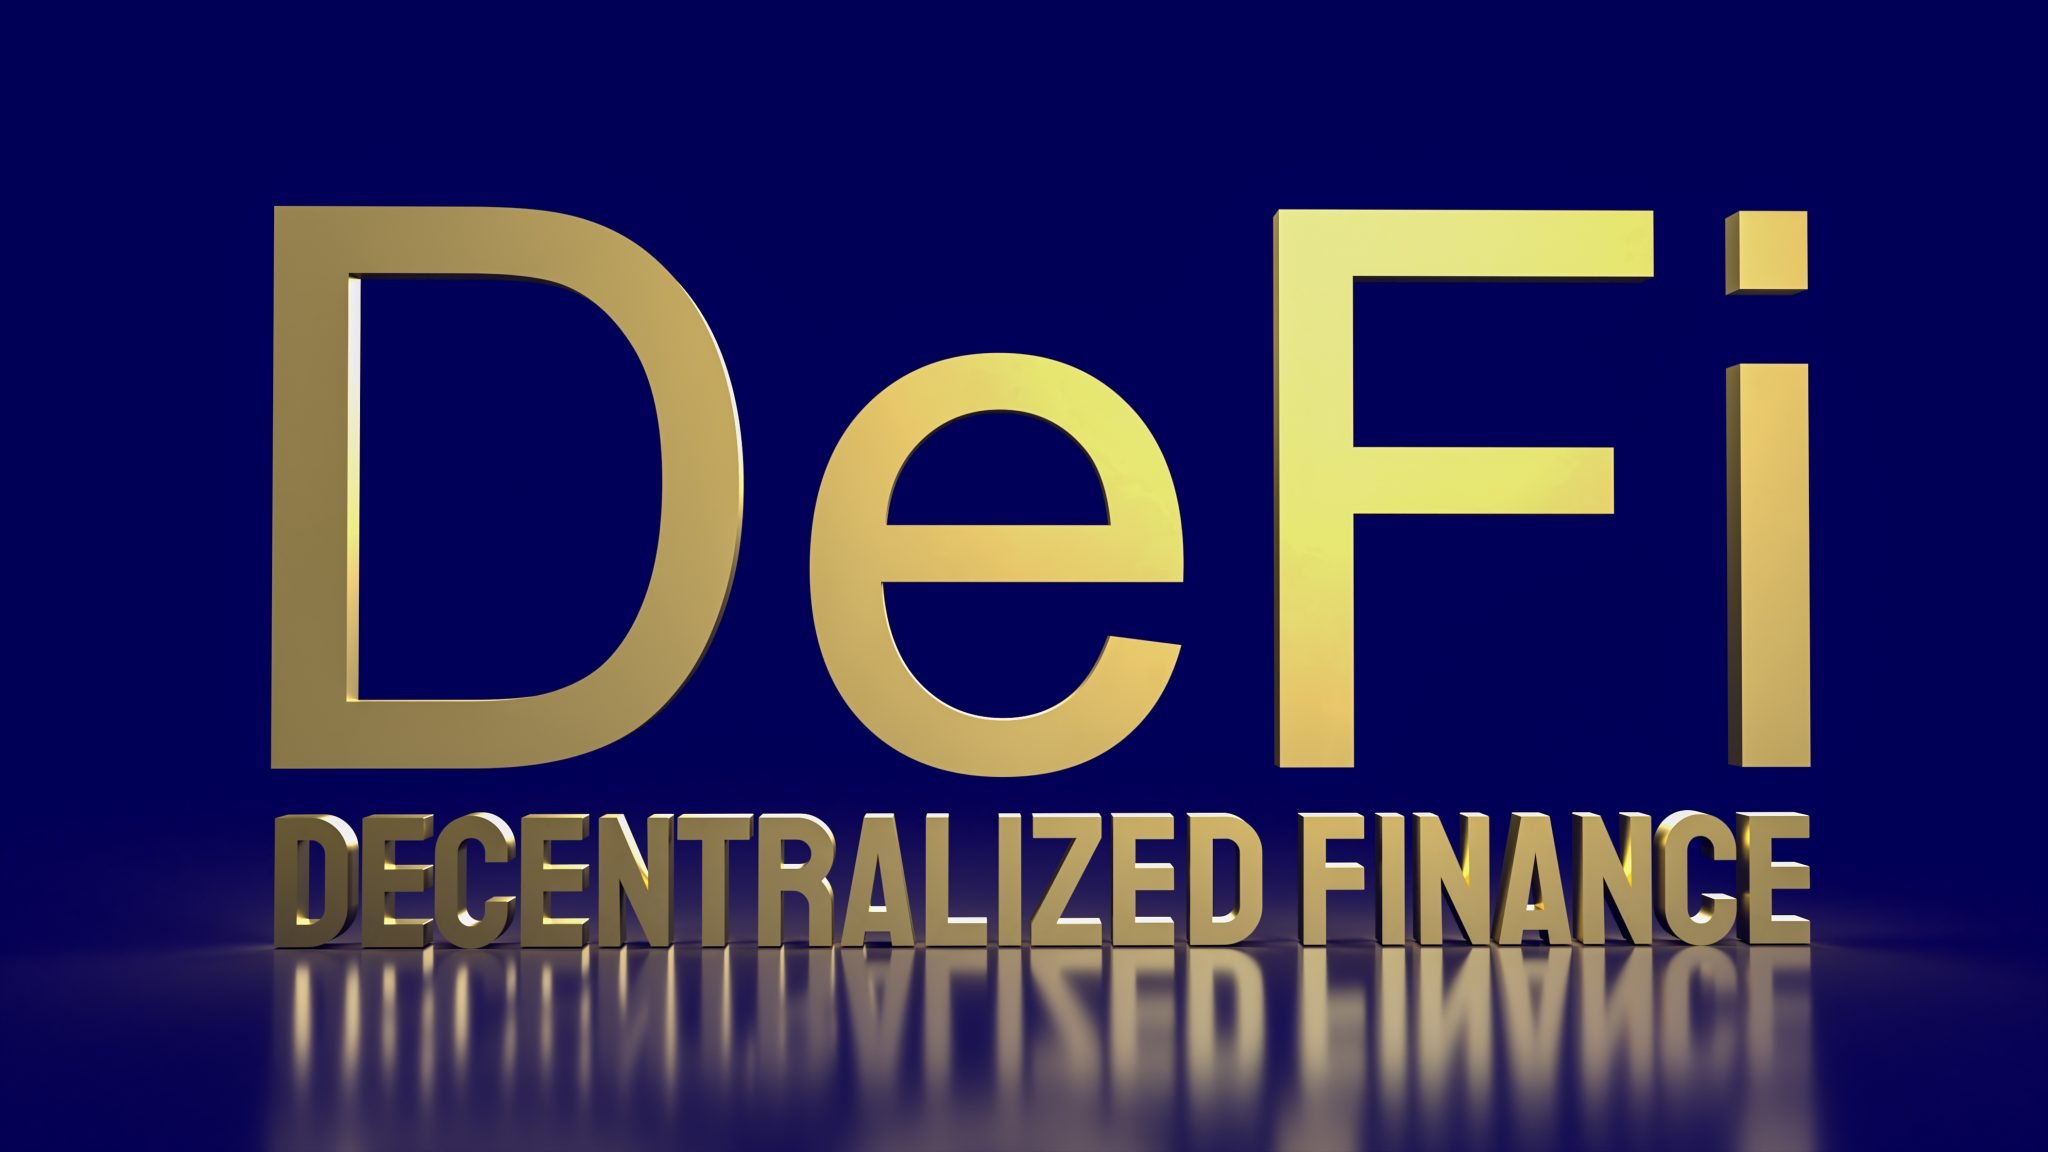 The  defi farming gold word on blue background  for cryptocurrency business concept 3d rendering